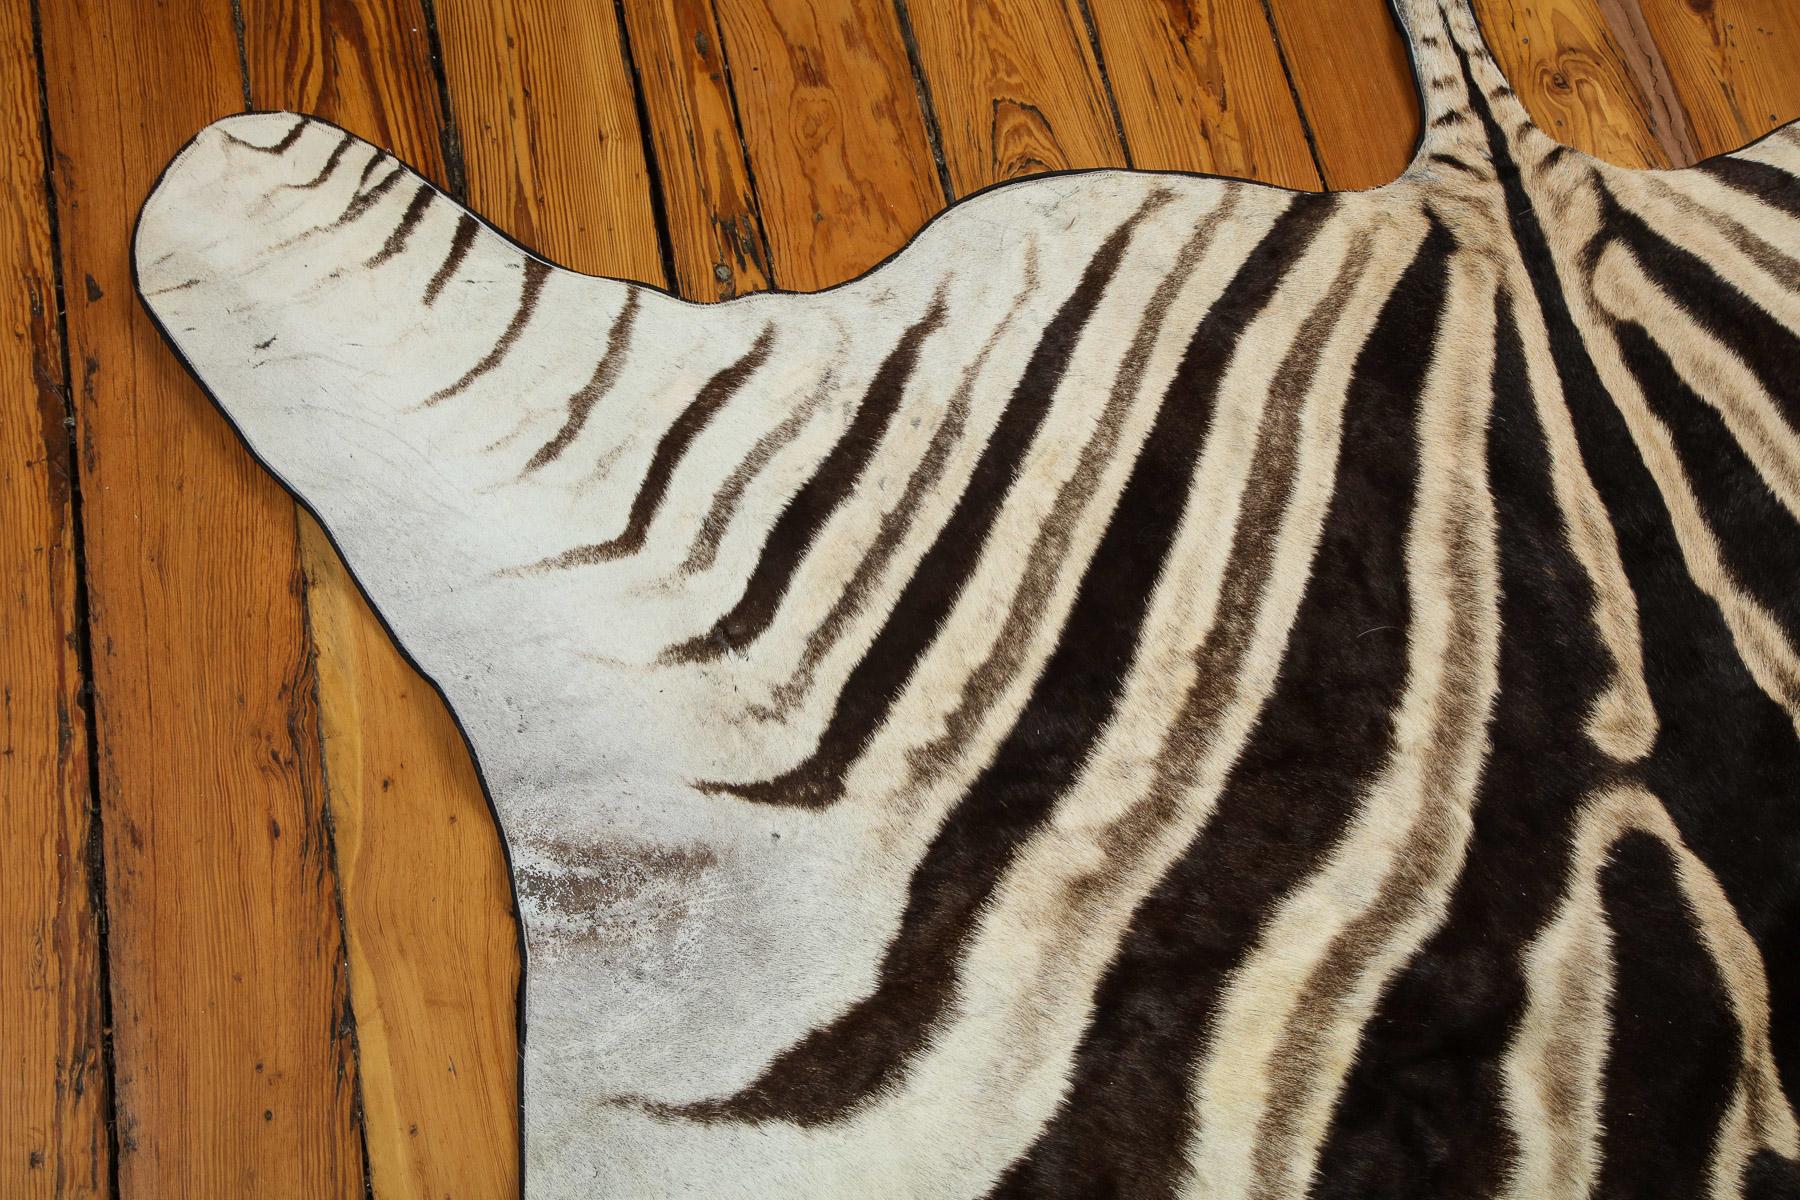 South African Zebra Hide Rug, Chocolate Brown from South Africa